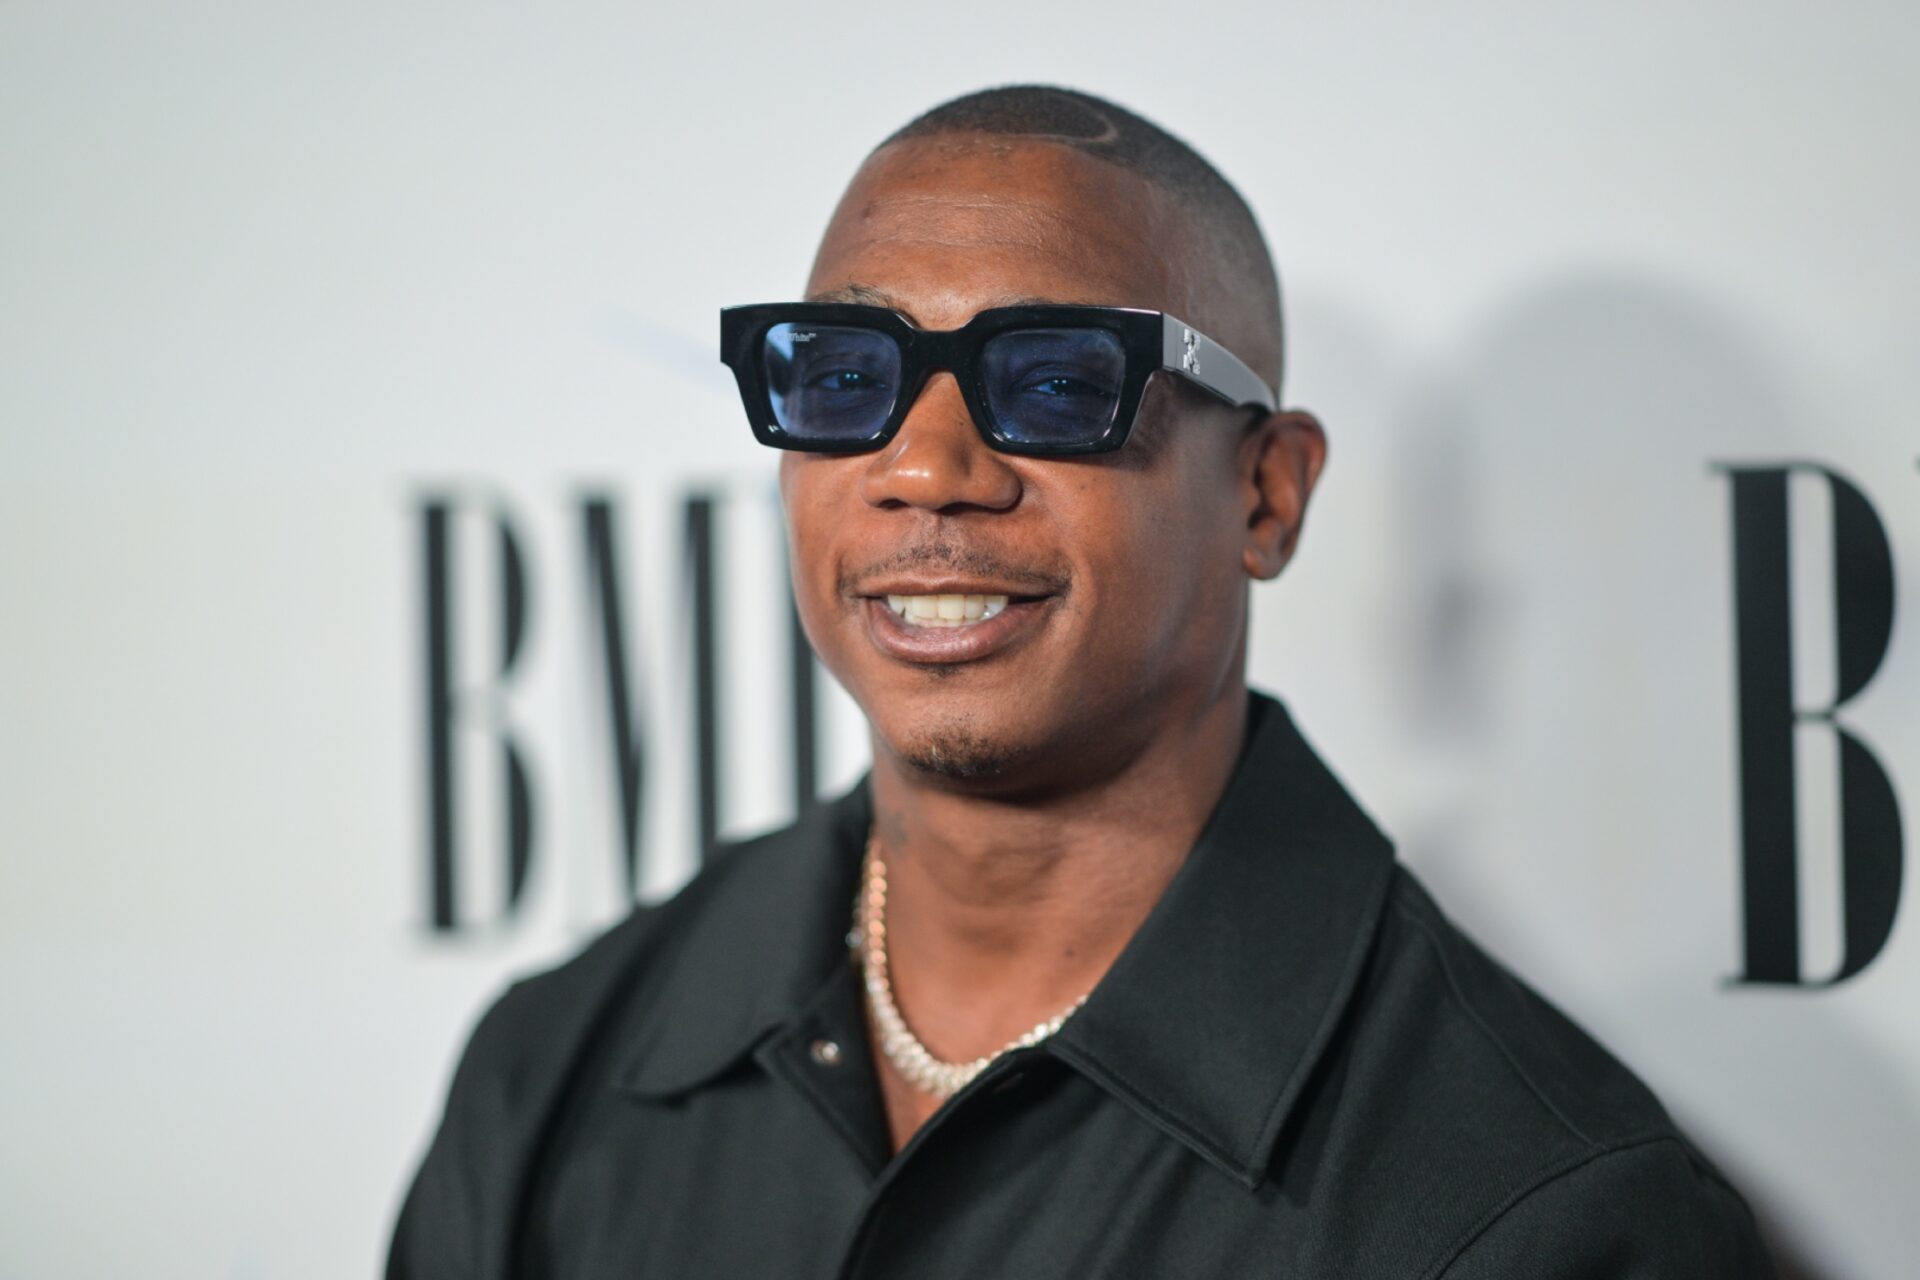 Uk Authorities Deny Ja Rule Entry Ahead Of Scheduled Tour, Yours Truly, State Fair Of West Virginia 2022, February 29, 2024